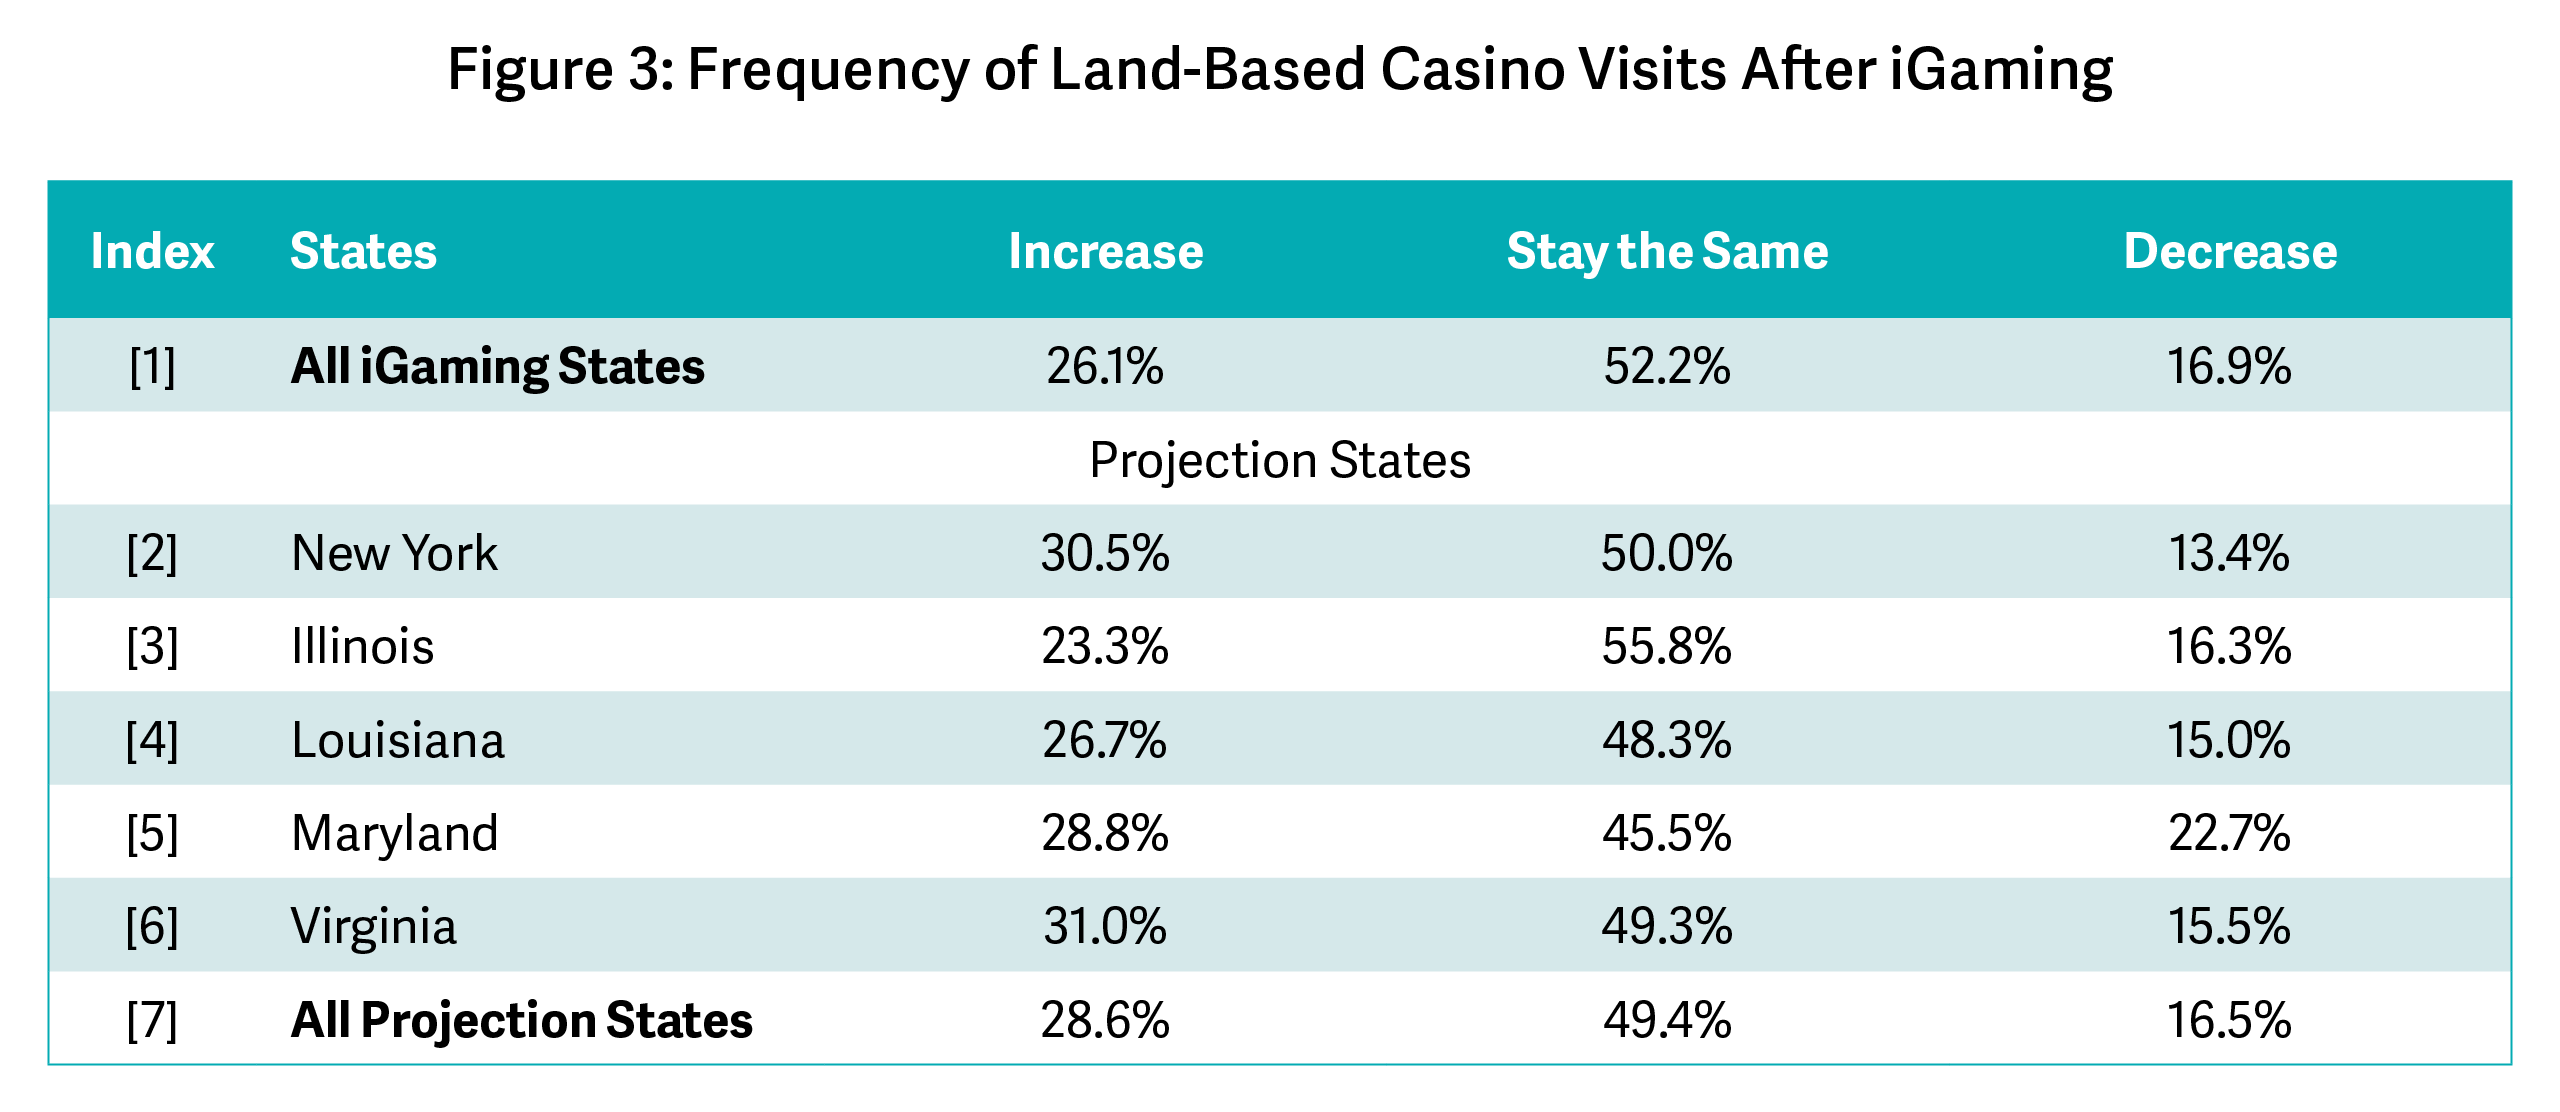 Table Illustrating the Frequency of Land-Based Casino Visits After iGaming